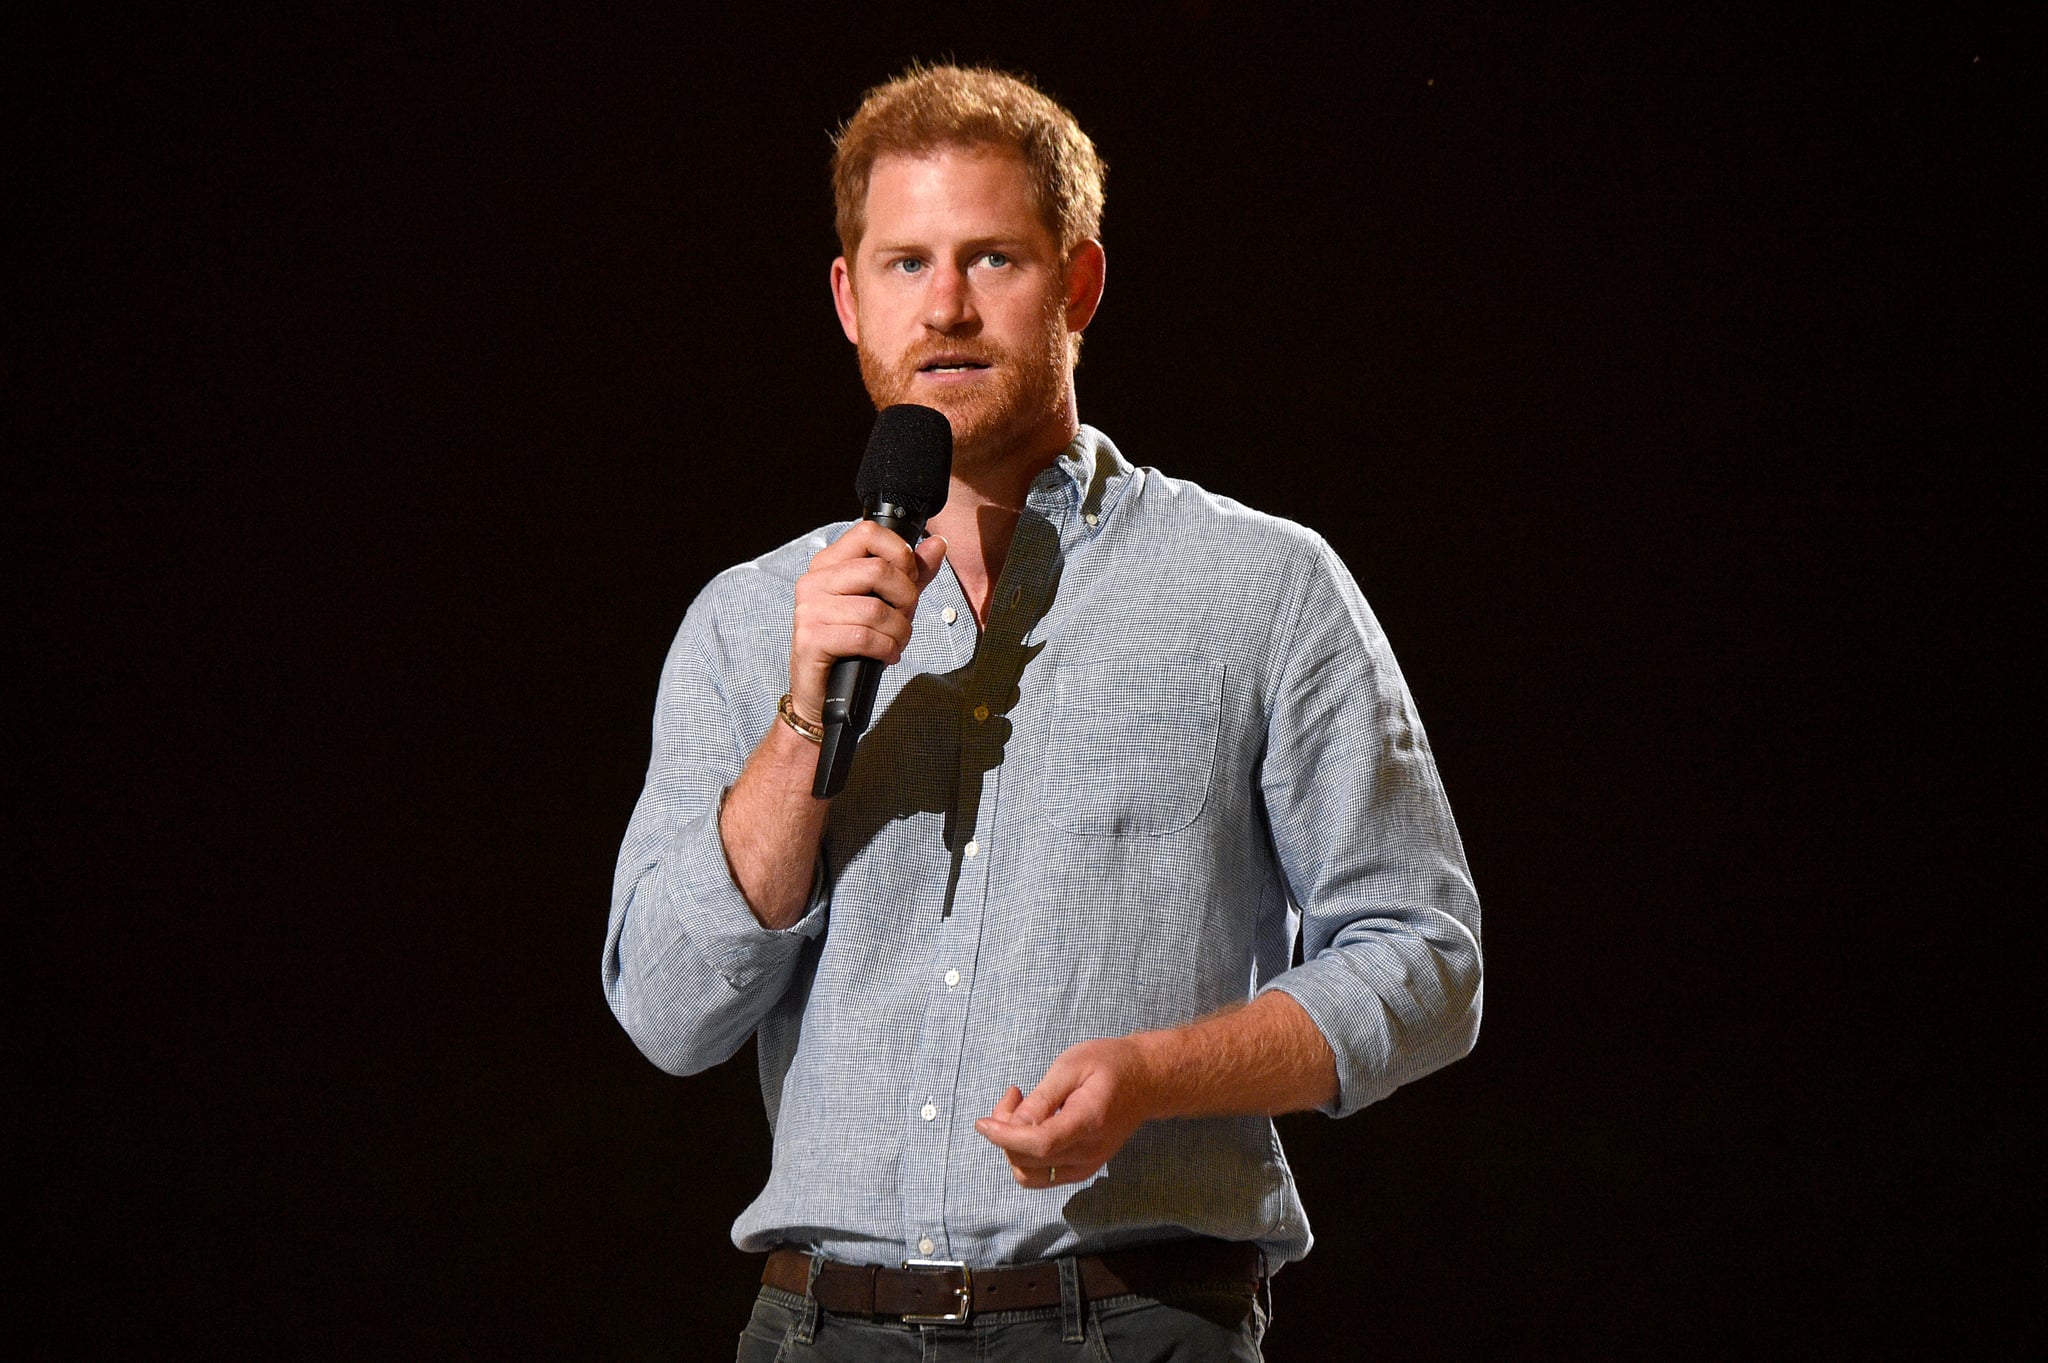 INGLEWOOD, CALIFORNIA: In this image released on May 2, Prince Harry, The Duke of Sussex speaks onstage during Global Citizen VAX LIVE: The Concert To Reunite The World at SoFi Stadium in Inglewood, California. Global Citizen VAX LIVE: The Concert To Reunite The World will be broadcast on May 8, 2021. (Photo by Kevin Mazur/Getty Images for Global Citizen VAX LIVE)